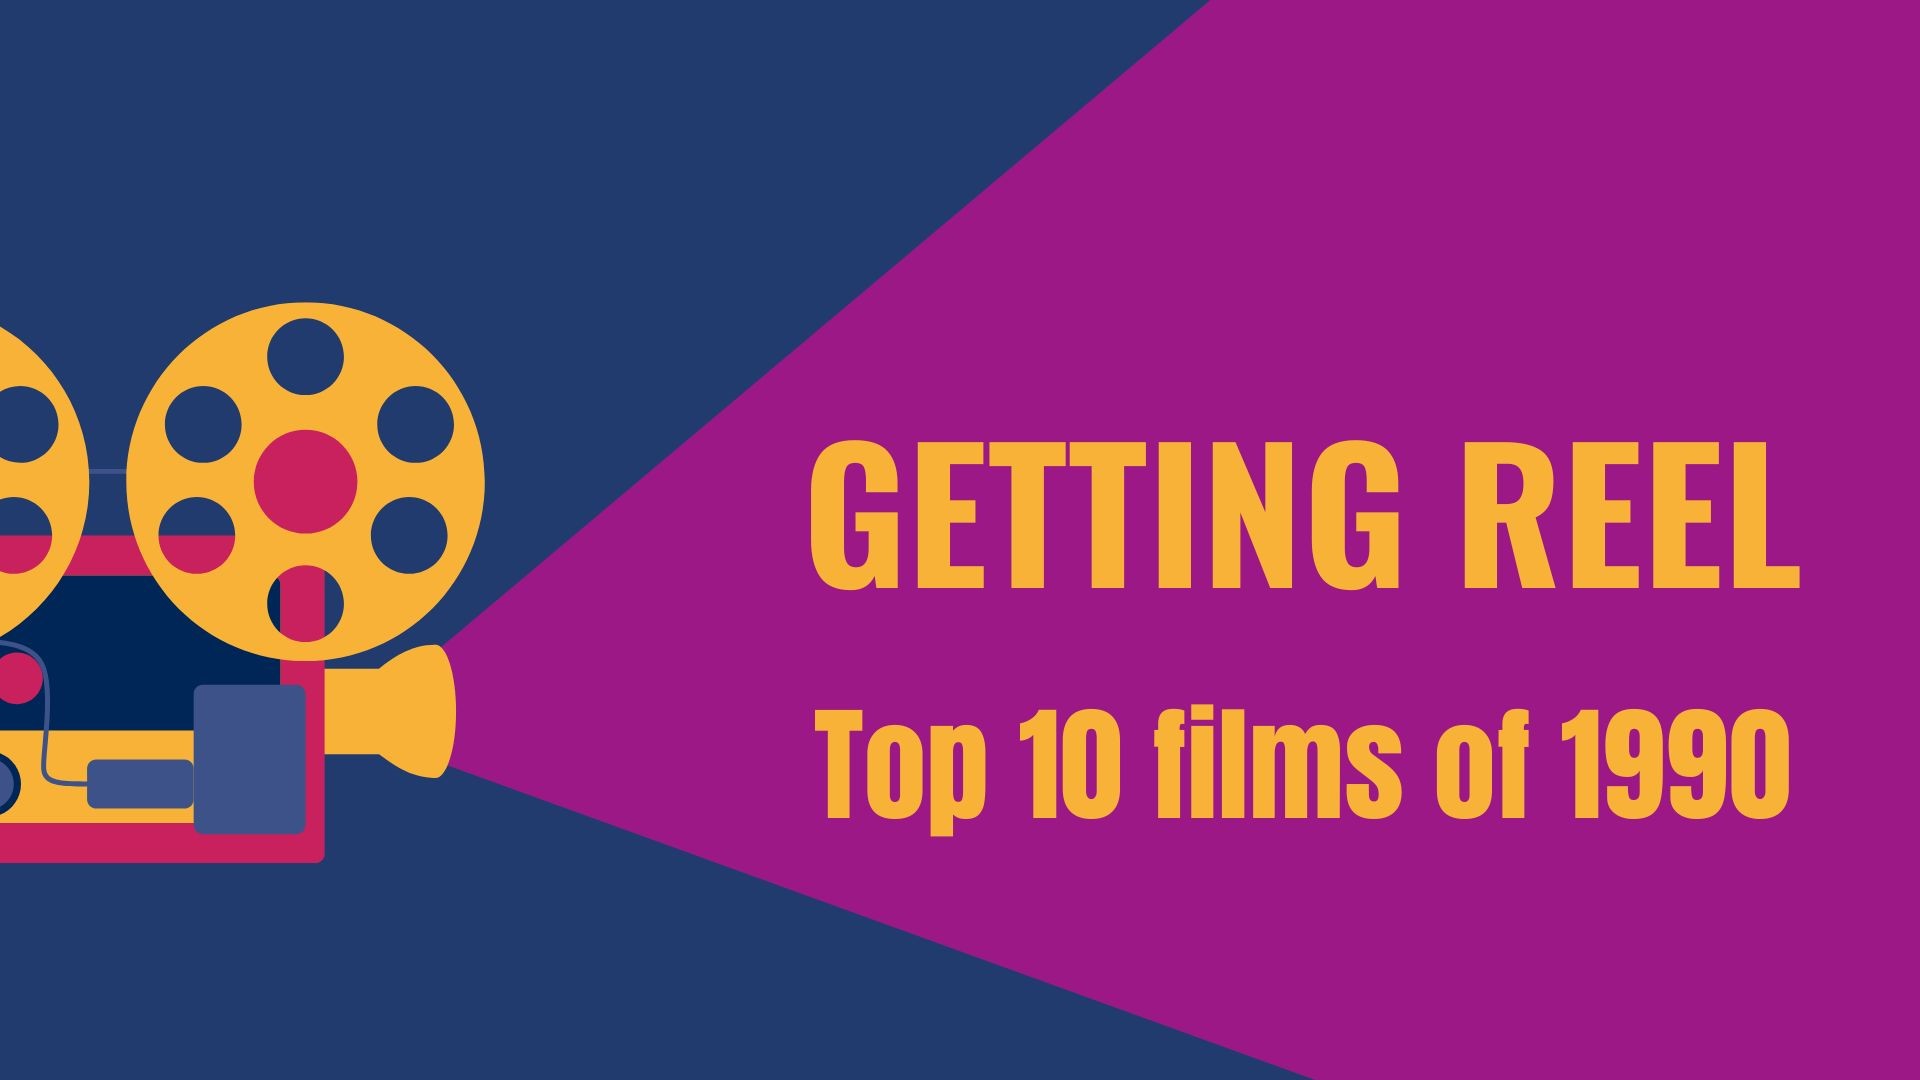 Michael, JD and Zach of the Getting Reel team at KTHV break down the Top 10 films of 1990.